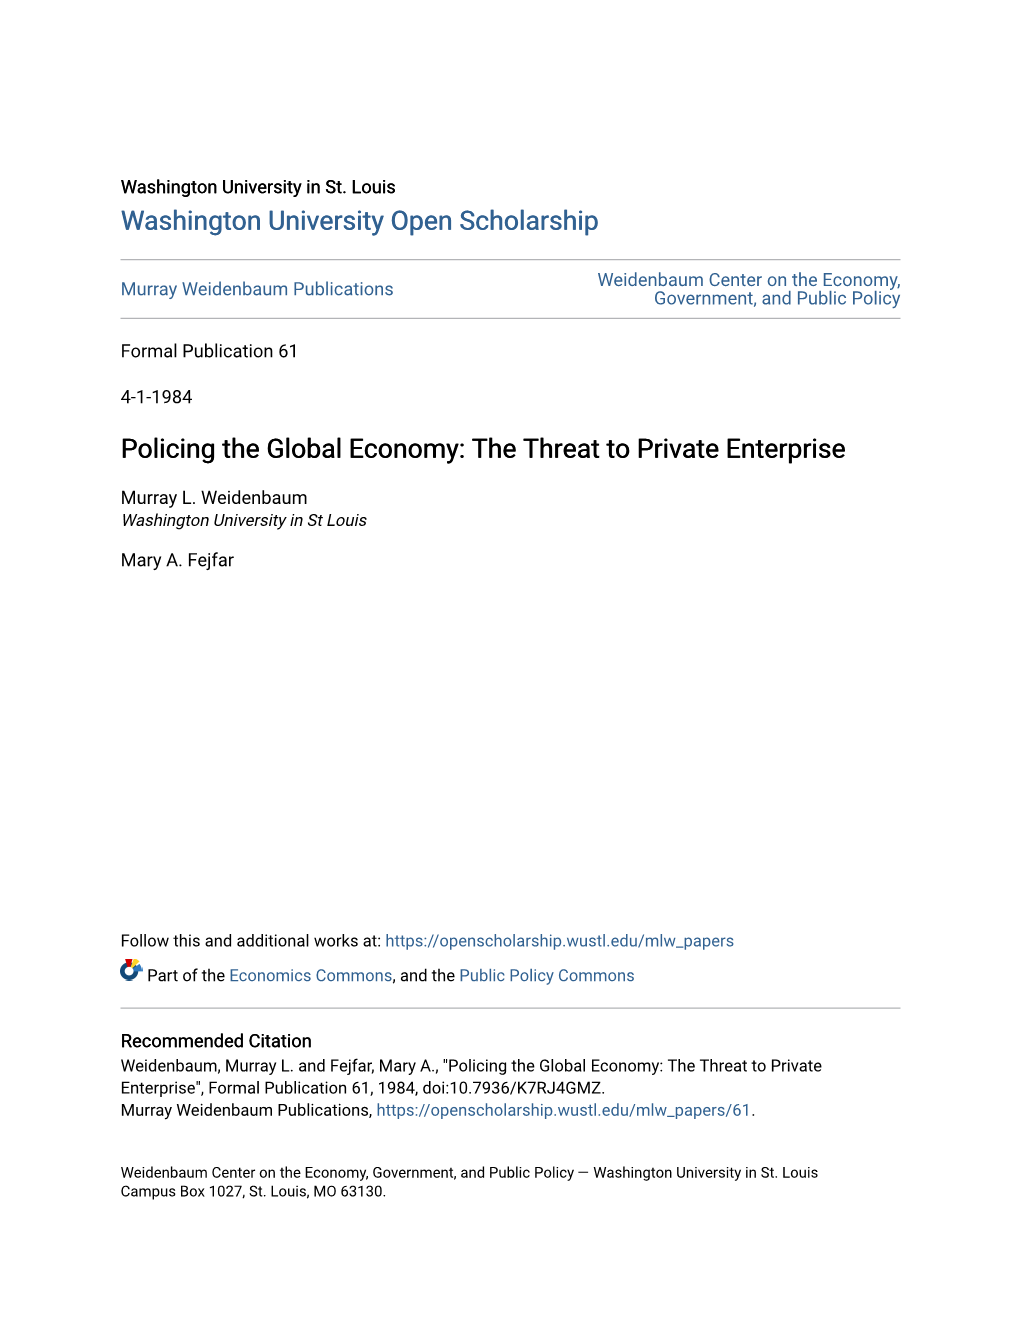 Policing the Global Economy: the Threat to Private Enterprise